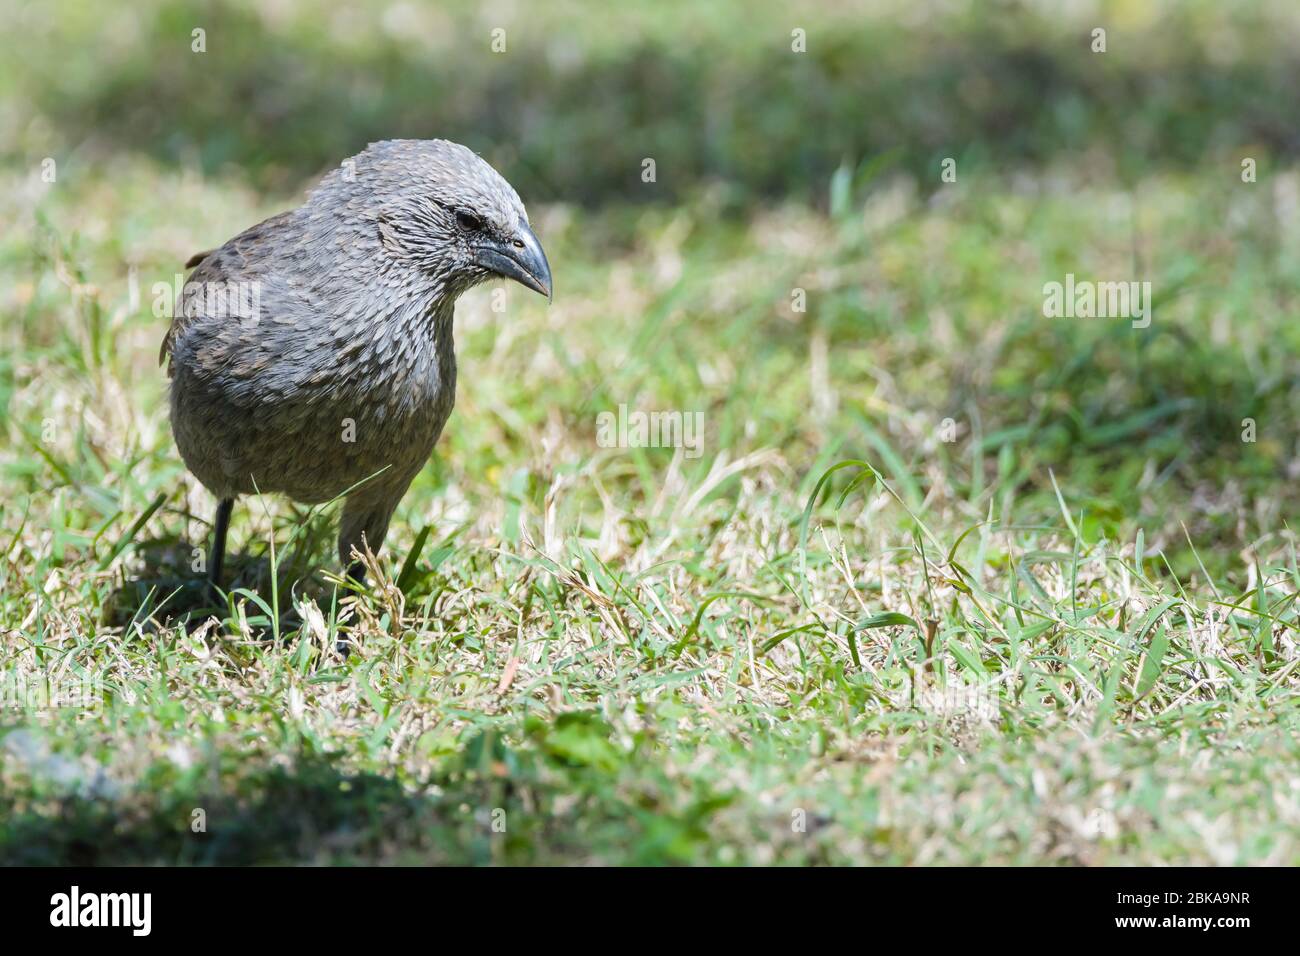 View of an apostle bird also known as the grey jumper, lousy jack walking on a grassy paddock on Amelia Downs in Western Queensland, Australia. Stock Photo